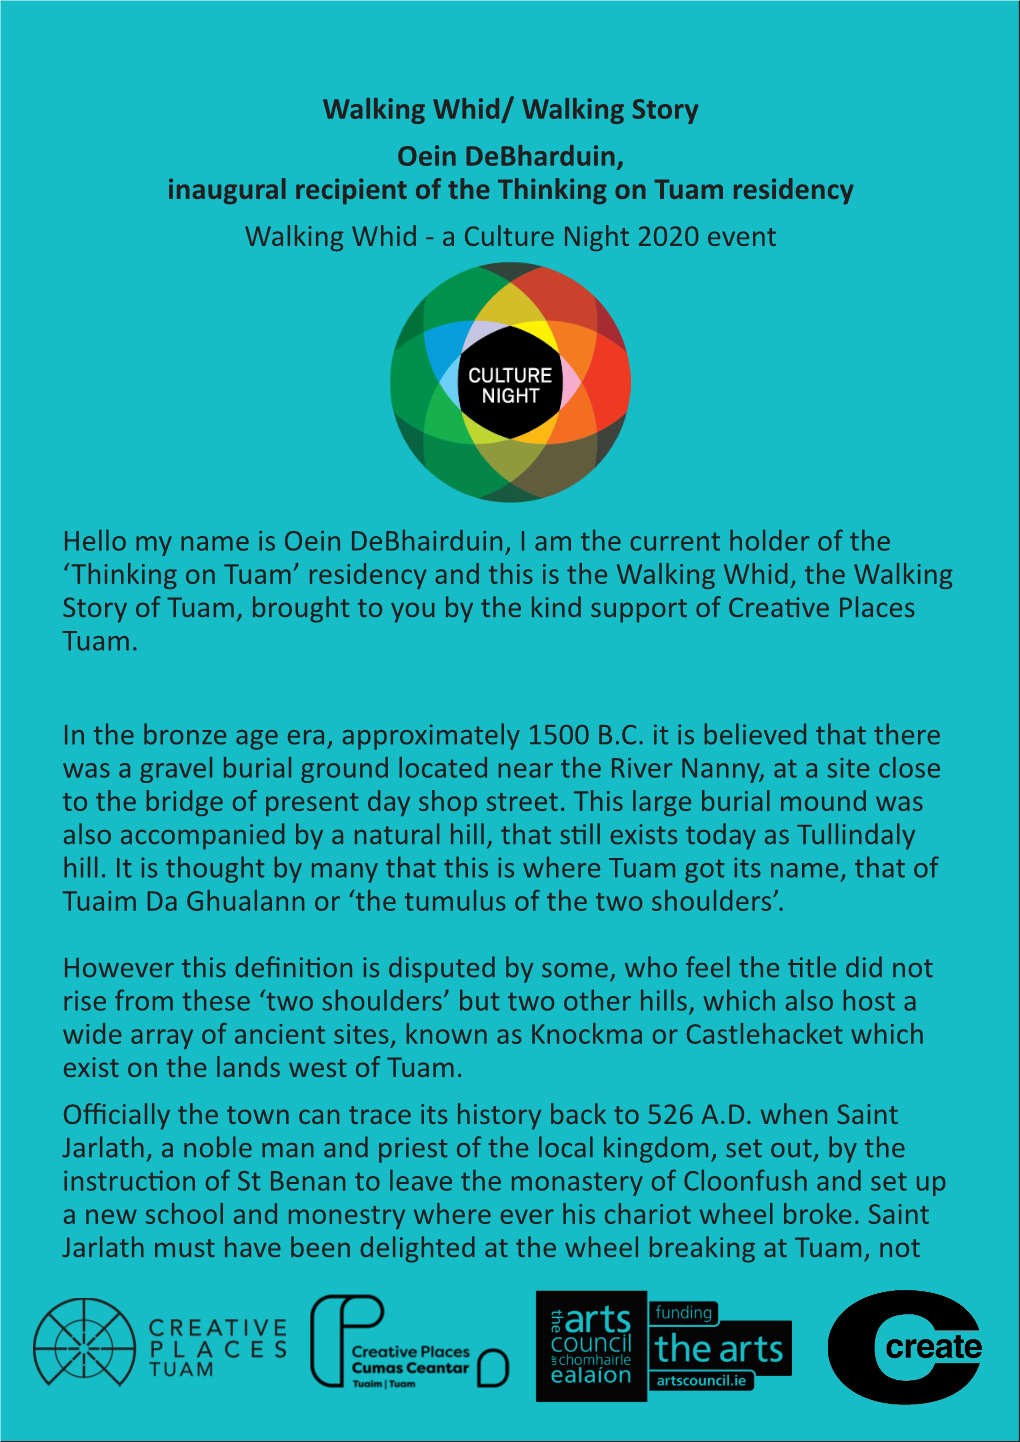 Walking Whid/ Walking Story Oein Debharduin, Inaugural Recipient of the Thinking on Tuam Residency Walking Whid - a Culture Night 2020 Event